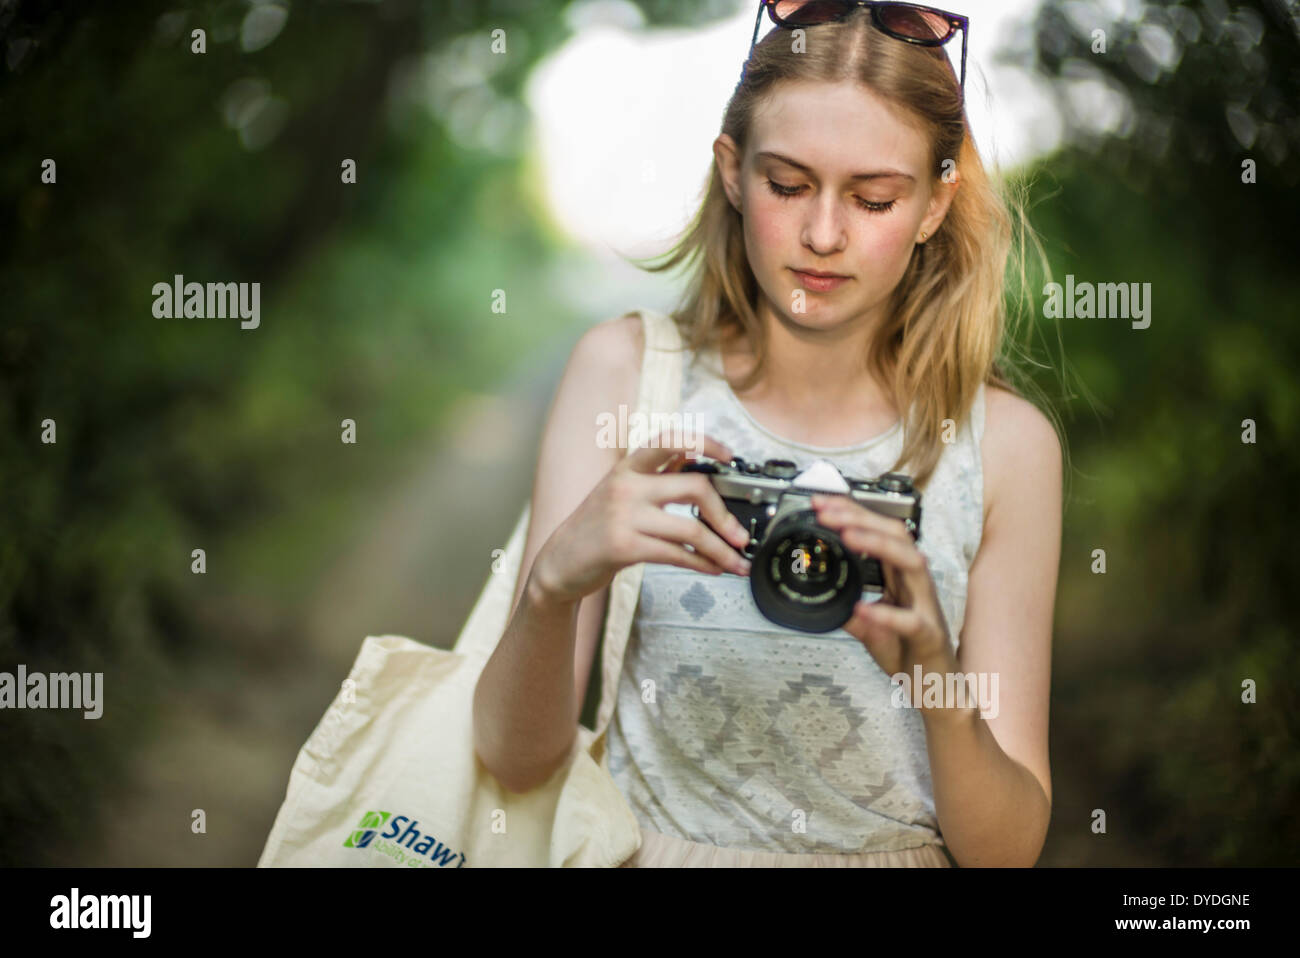 A young girl with a film camera. Stock Photo